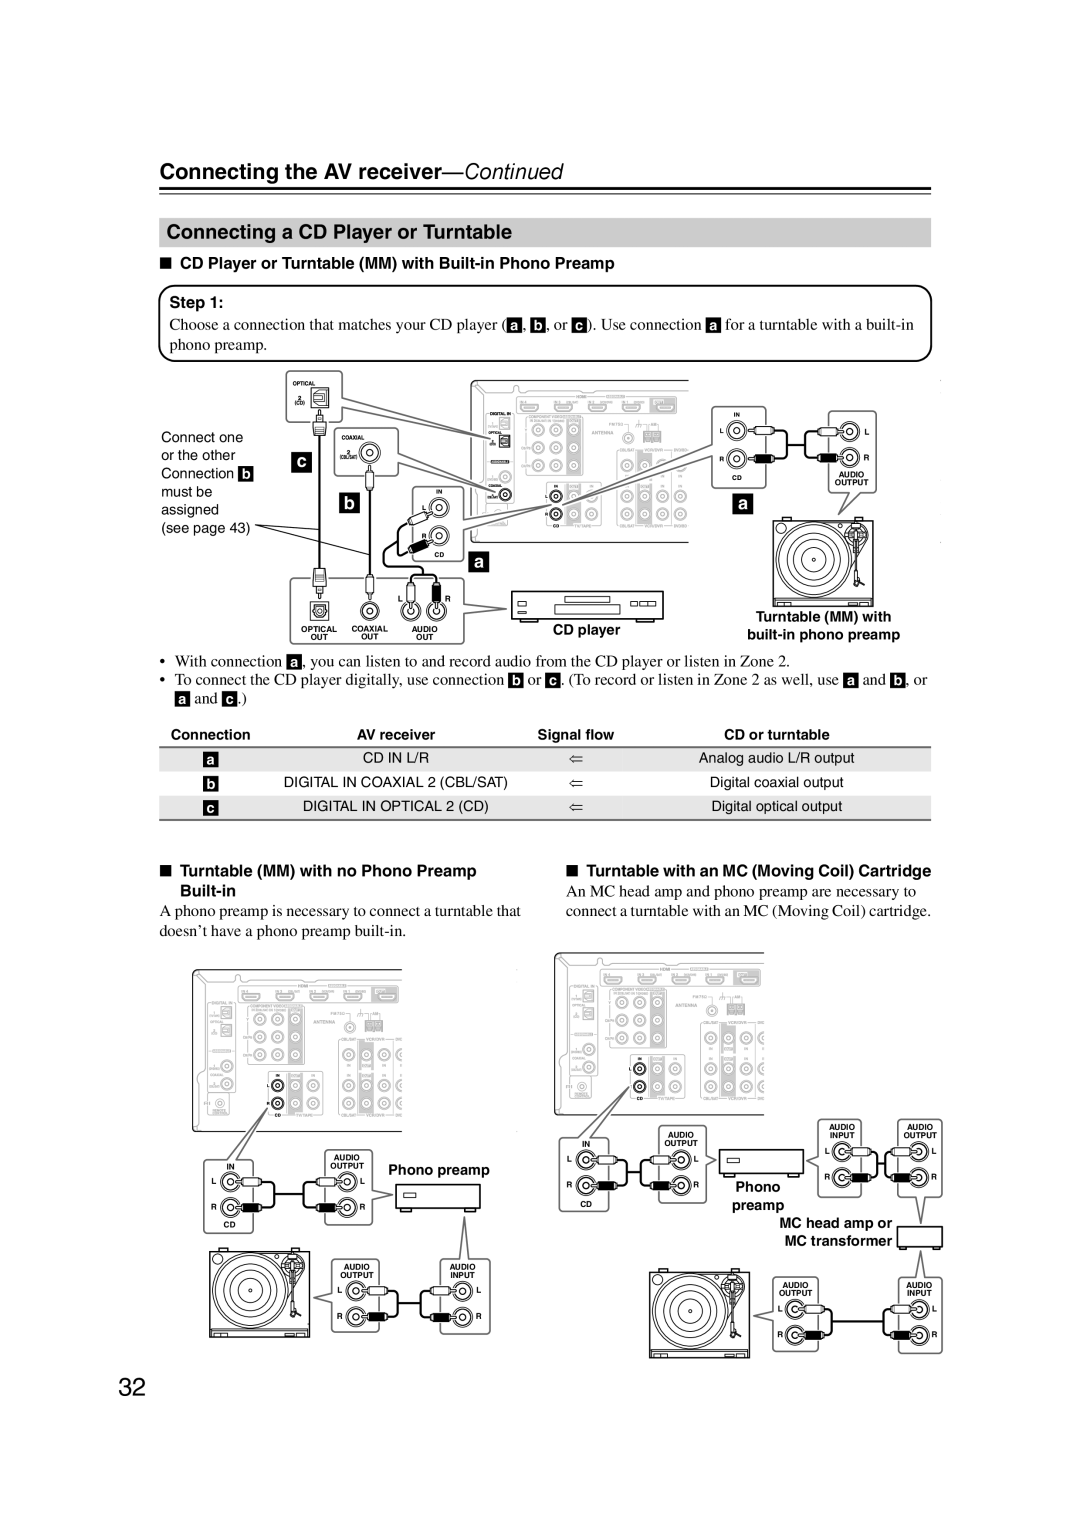 Onkyo TX-SR577, SR507 instruction manual Connecting a CD Player or Turntable, Connecting the AV receiver-Continued 